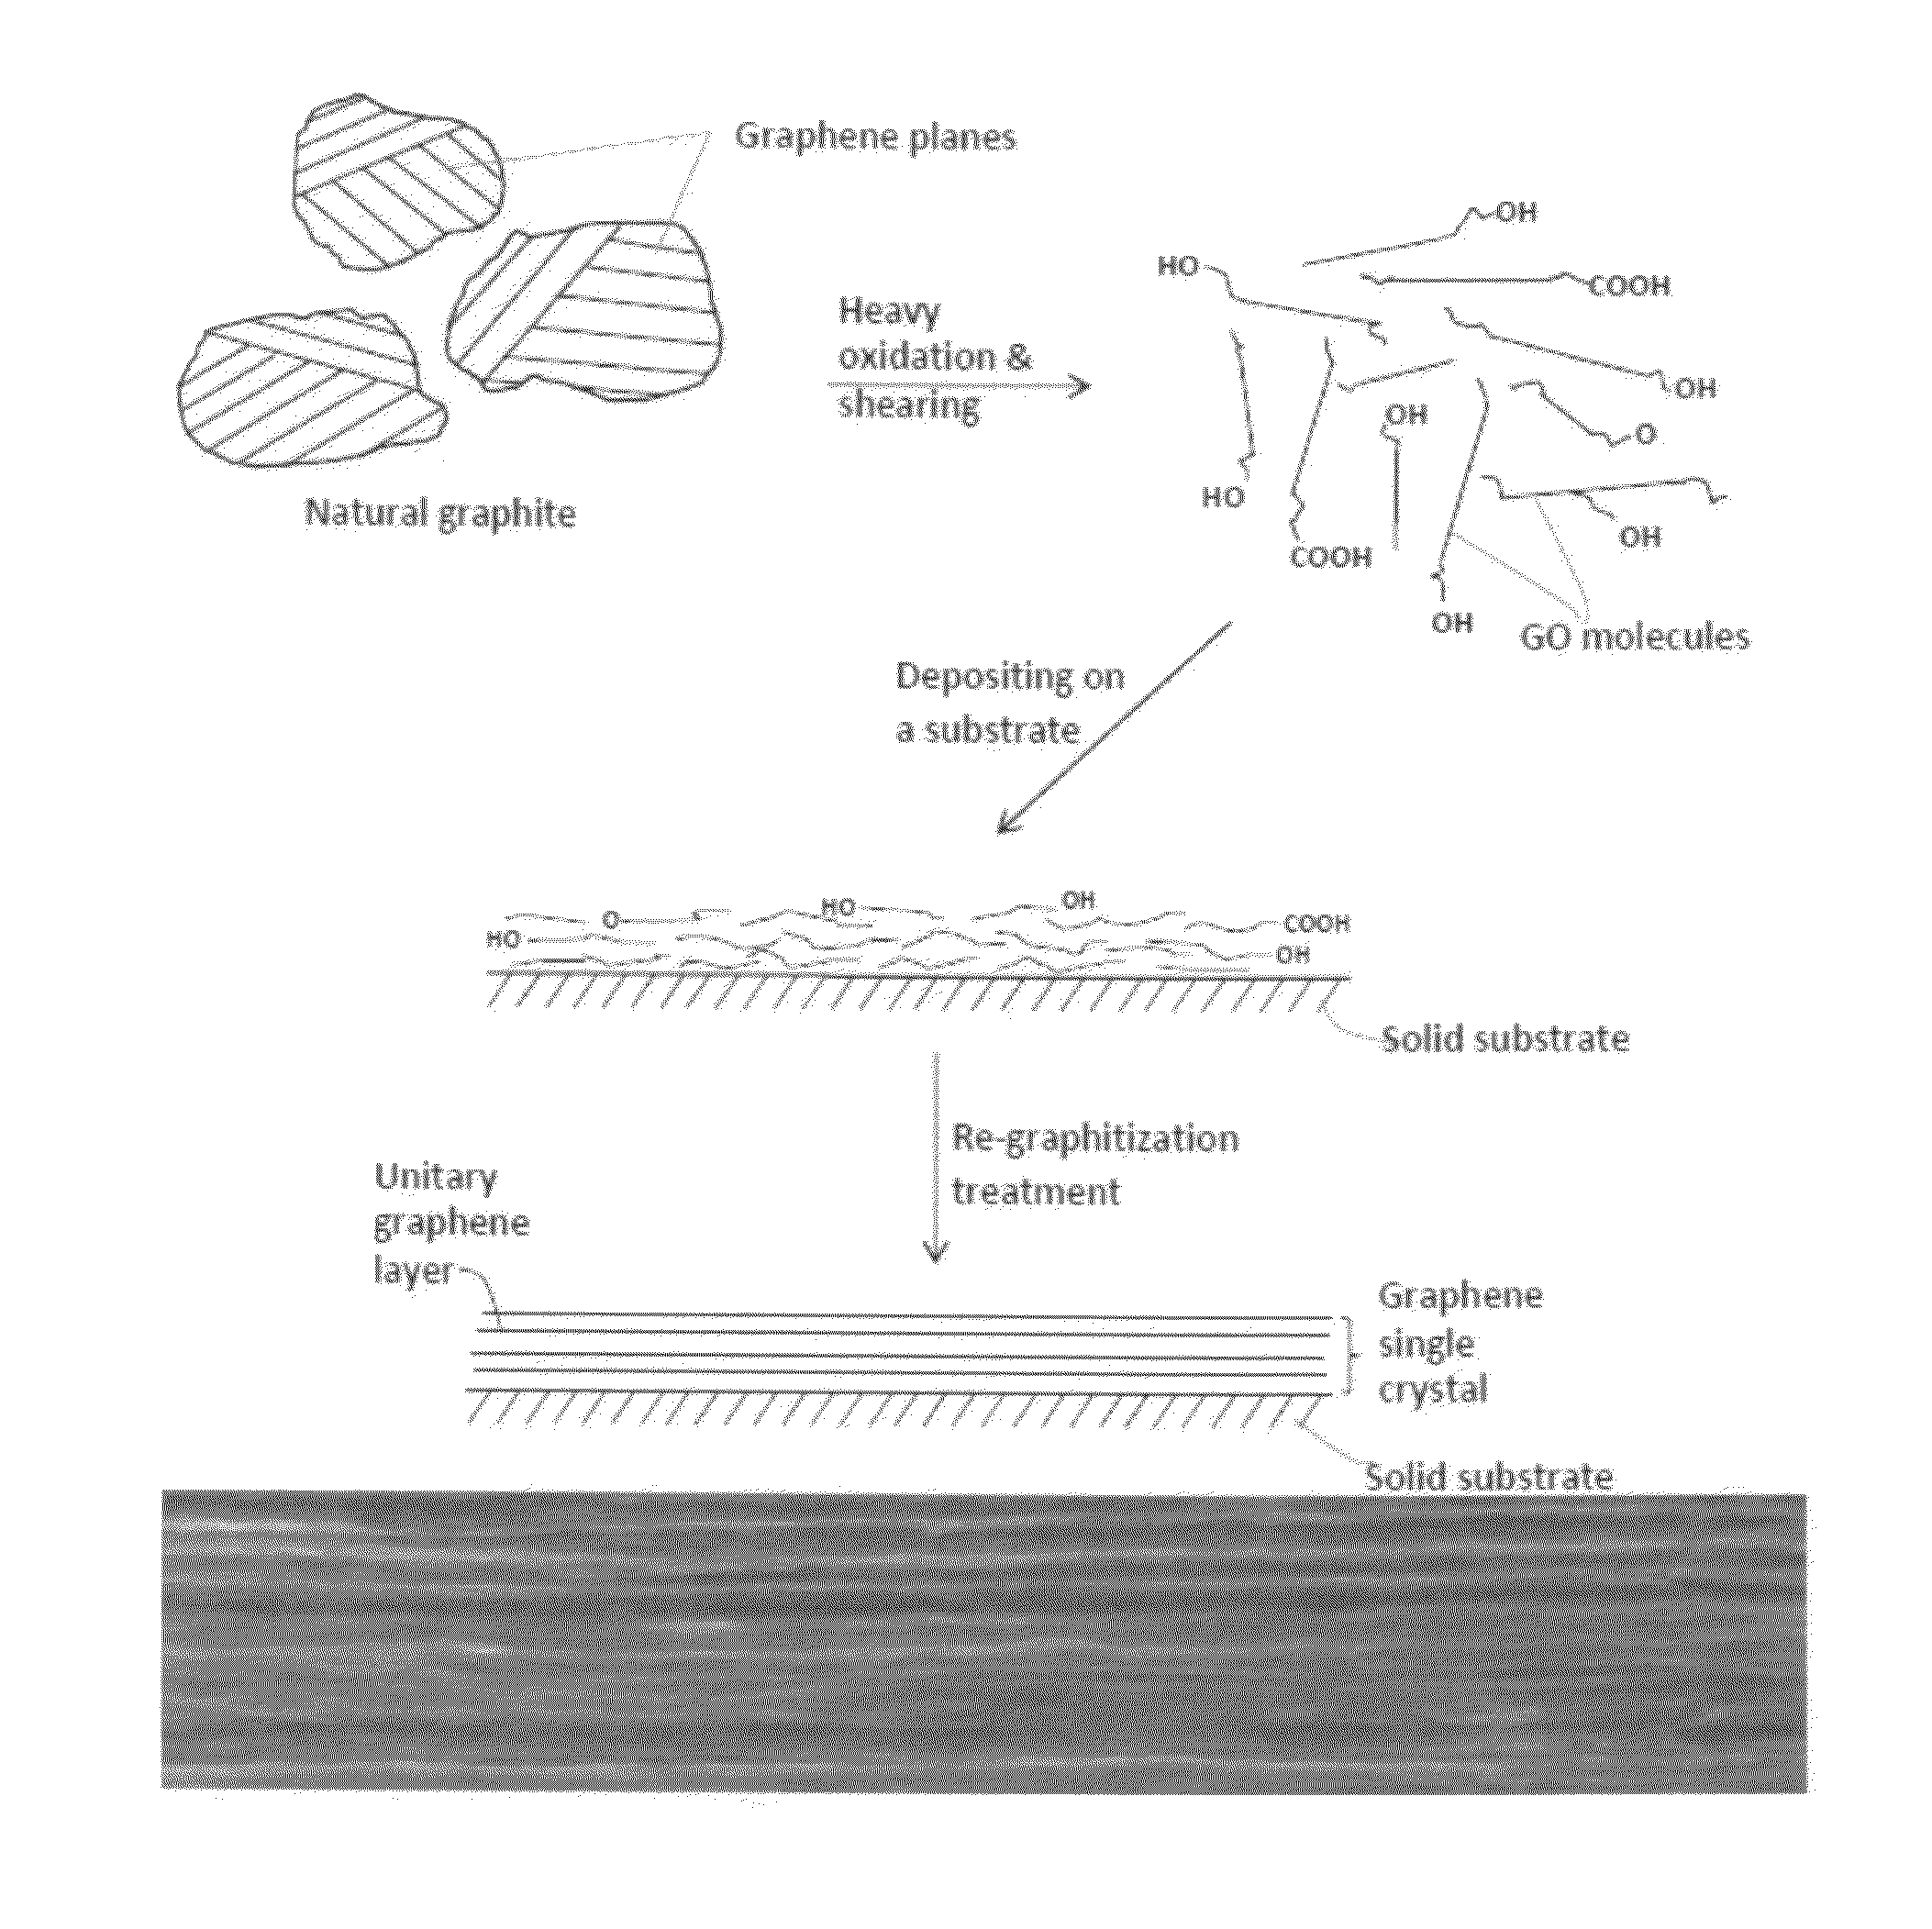 Process for producing unitary graphene materials